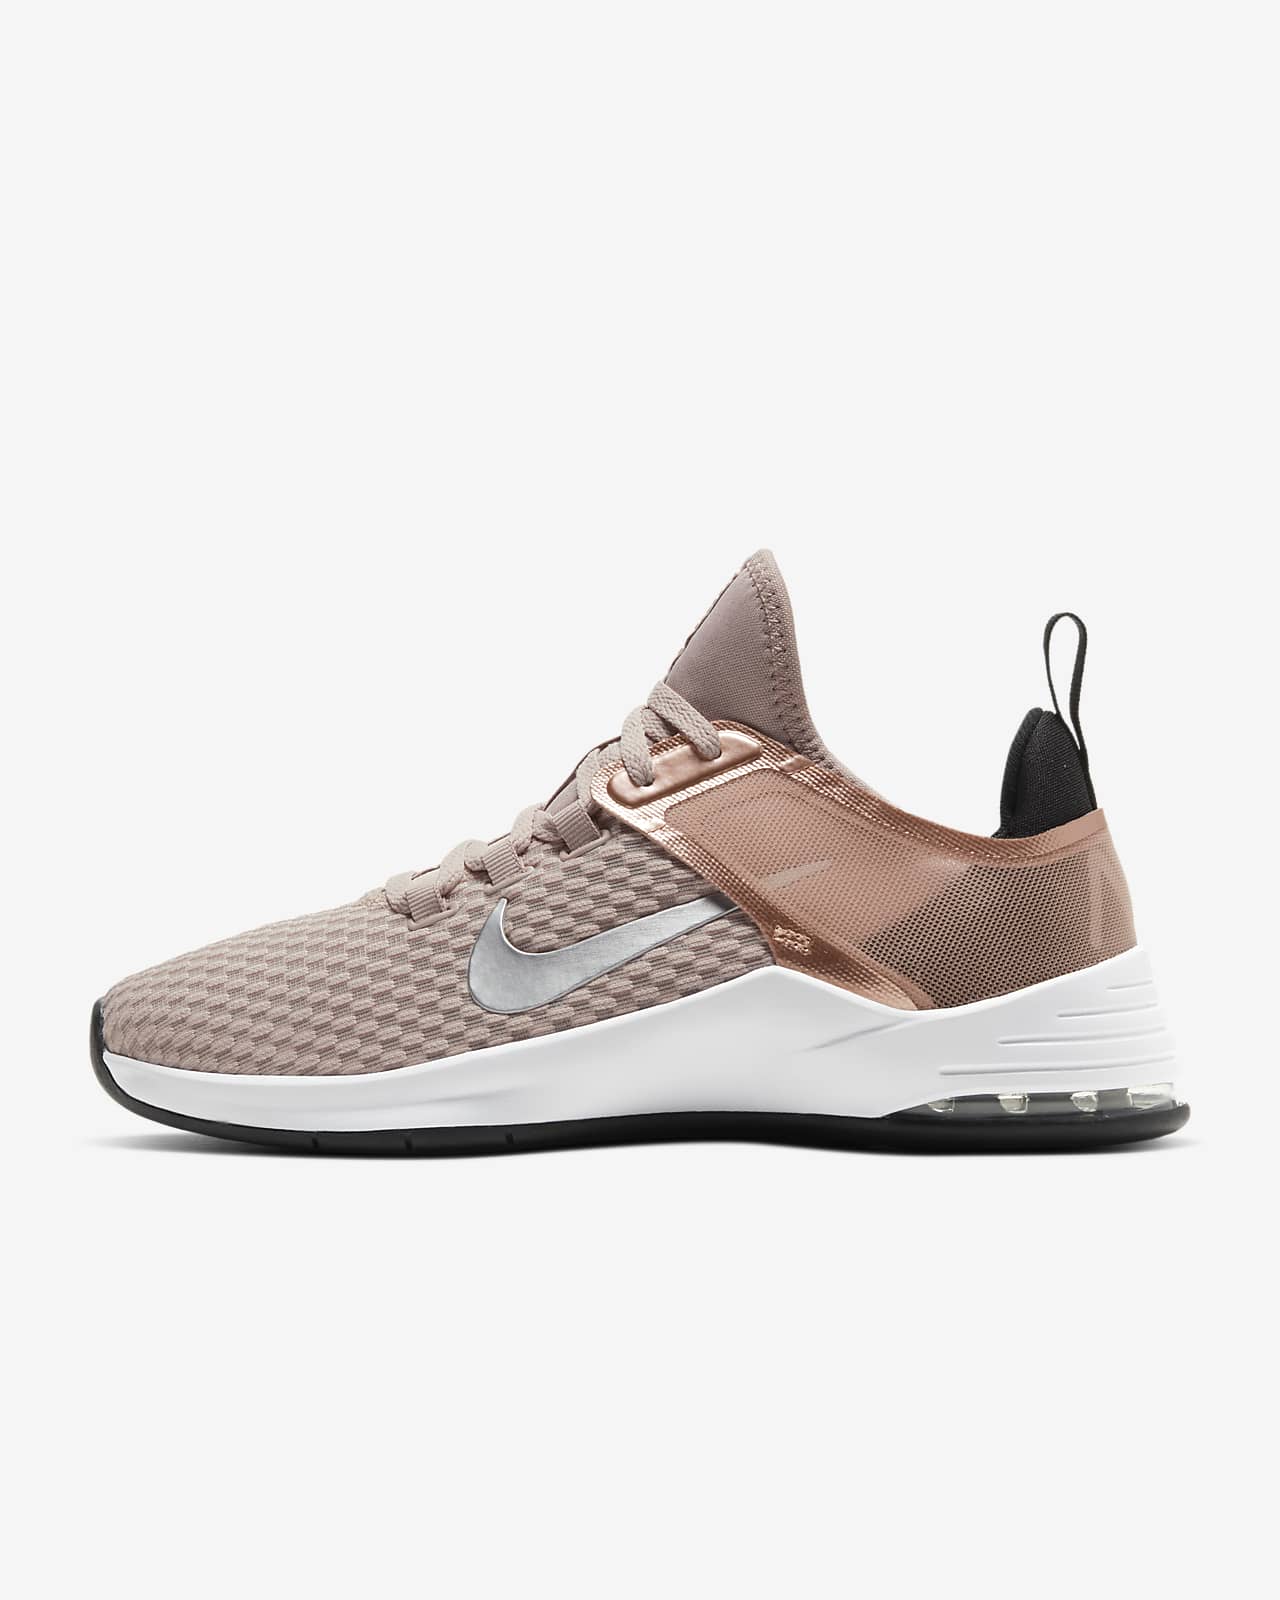 nike air max bella tr 2 women's training shoes stores